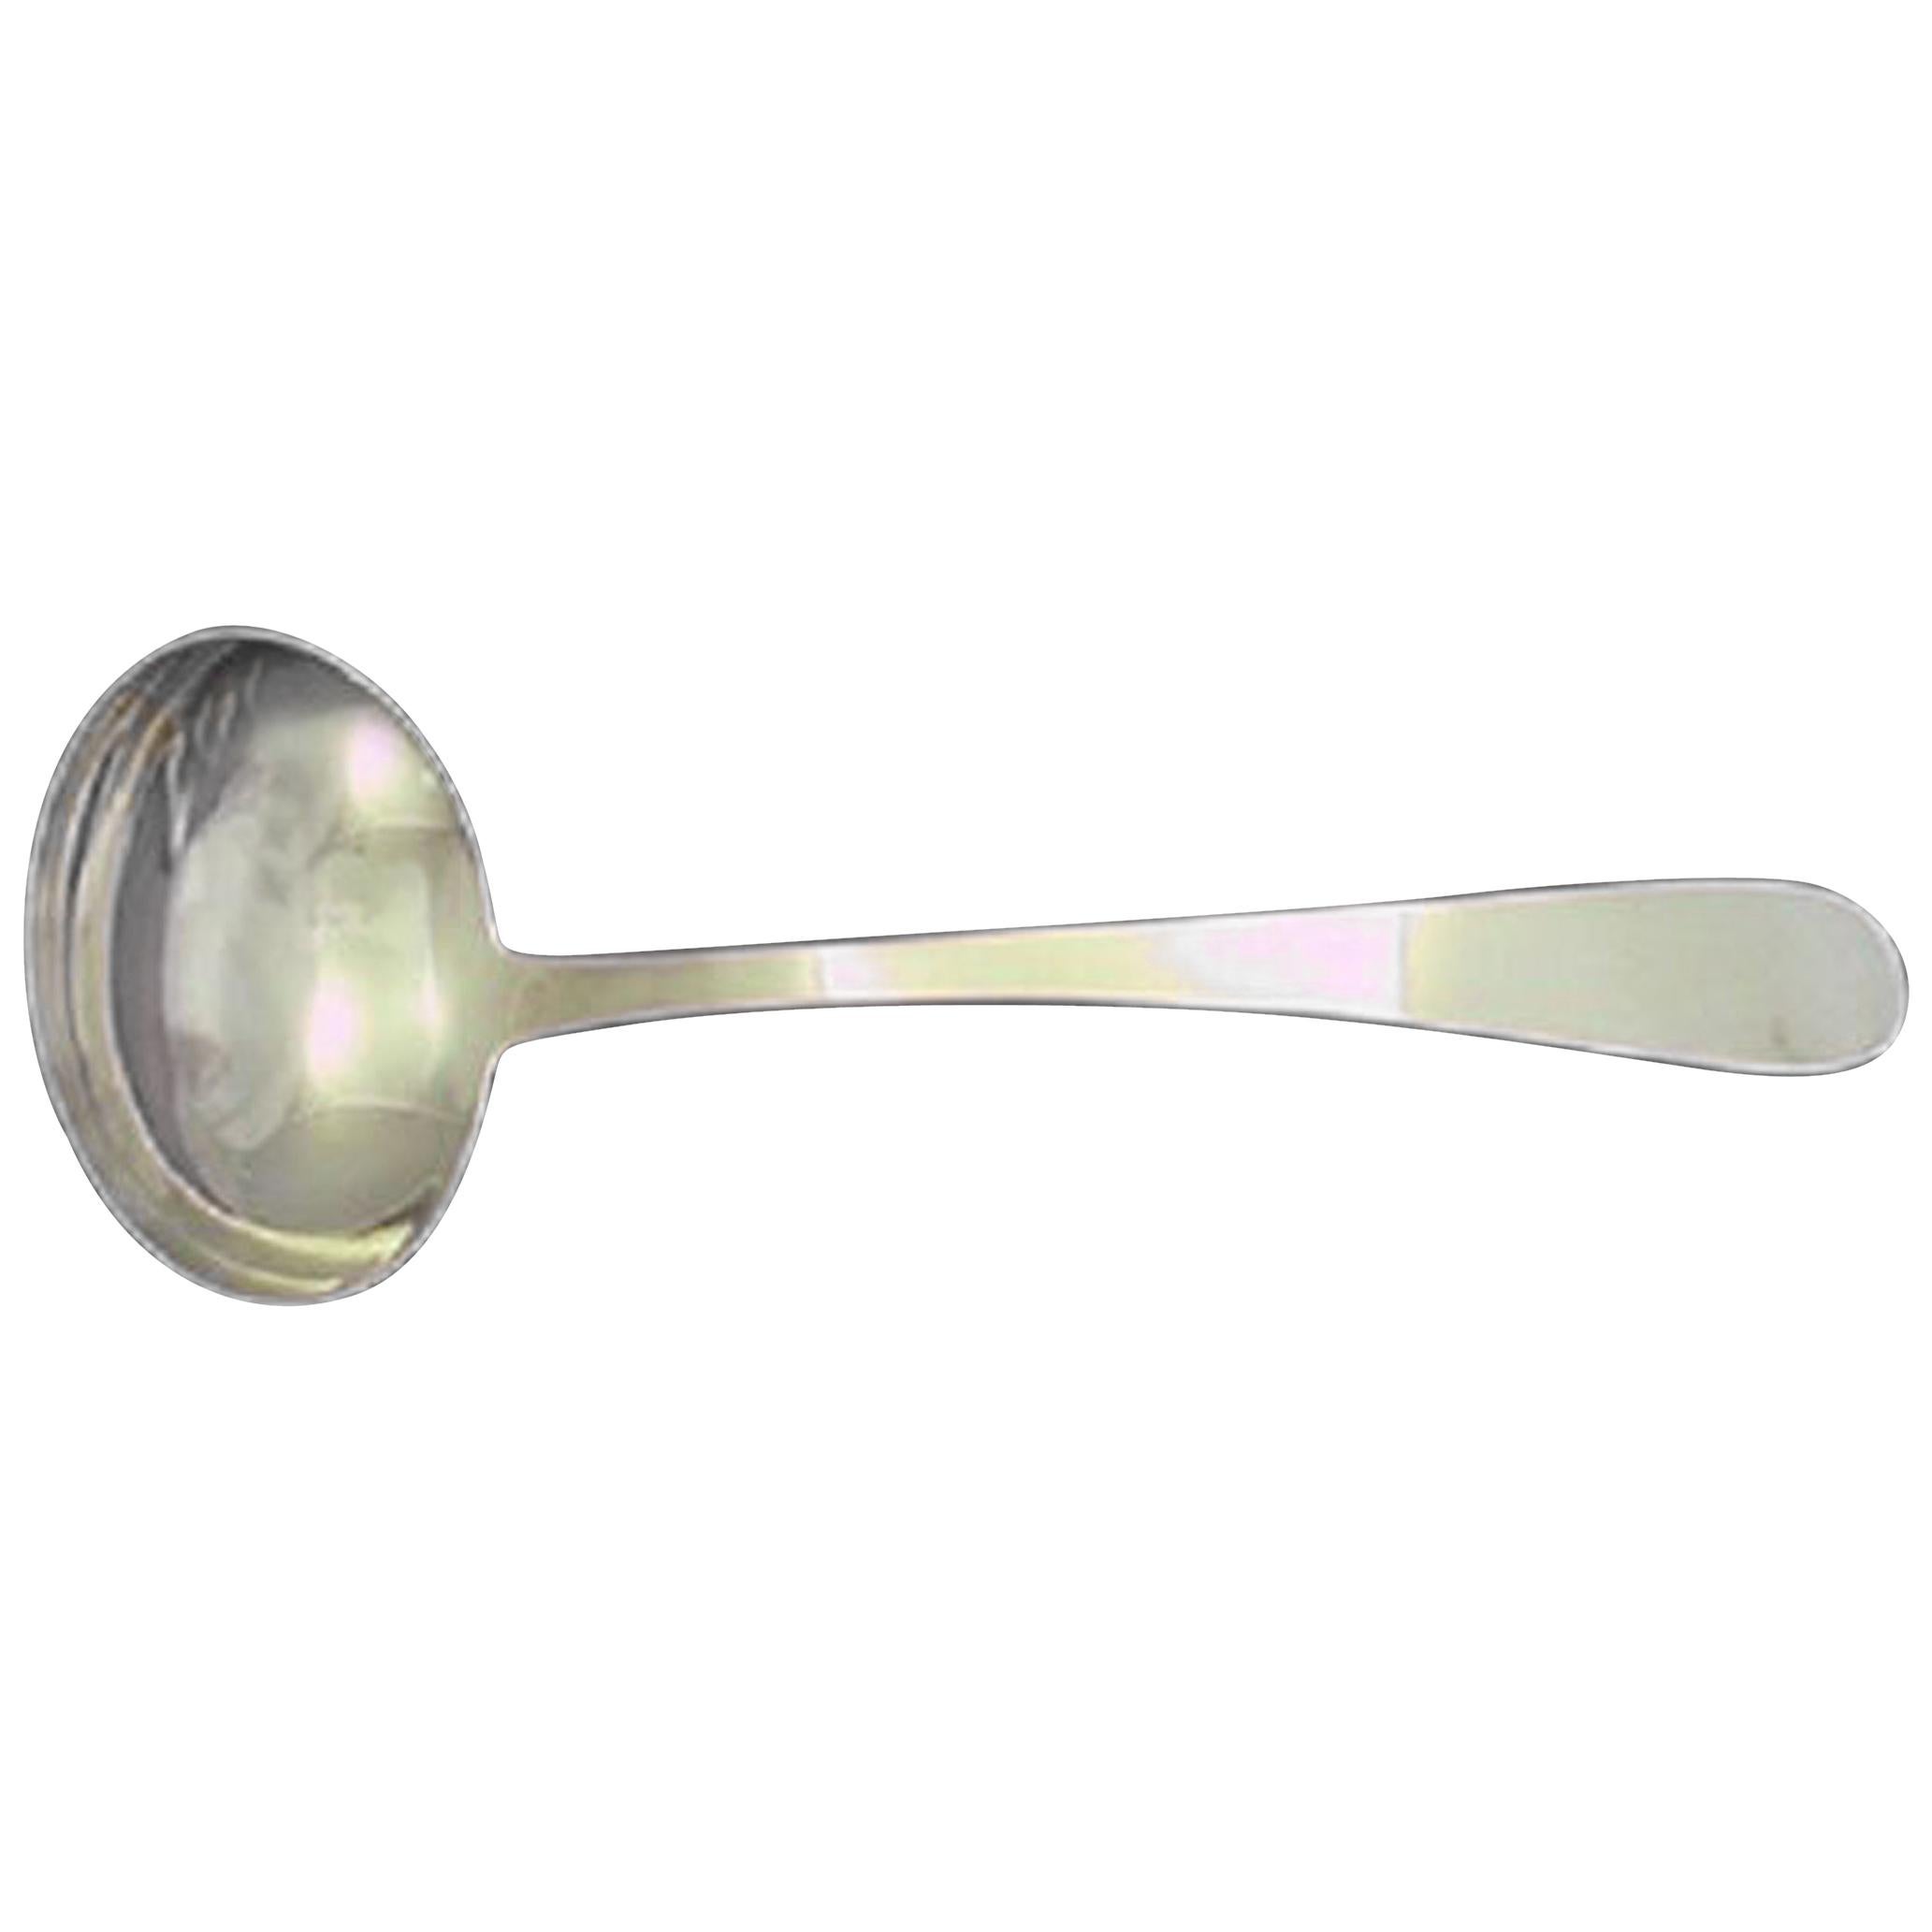 Salem by Tiffany and Co Sterling Silver Gravy Ladle Serving